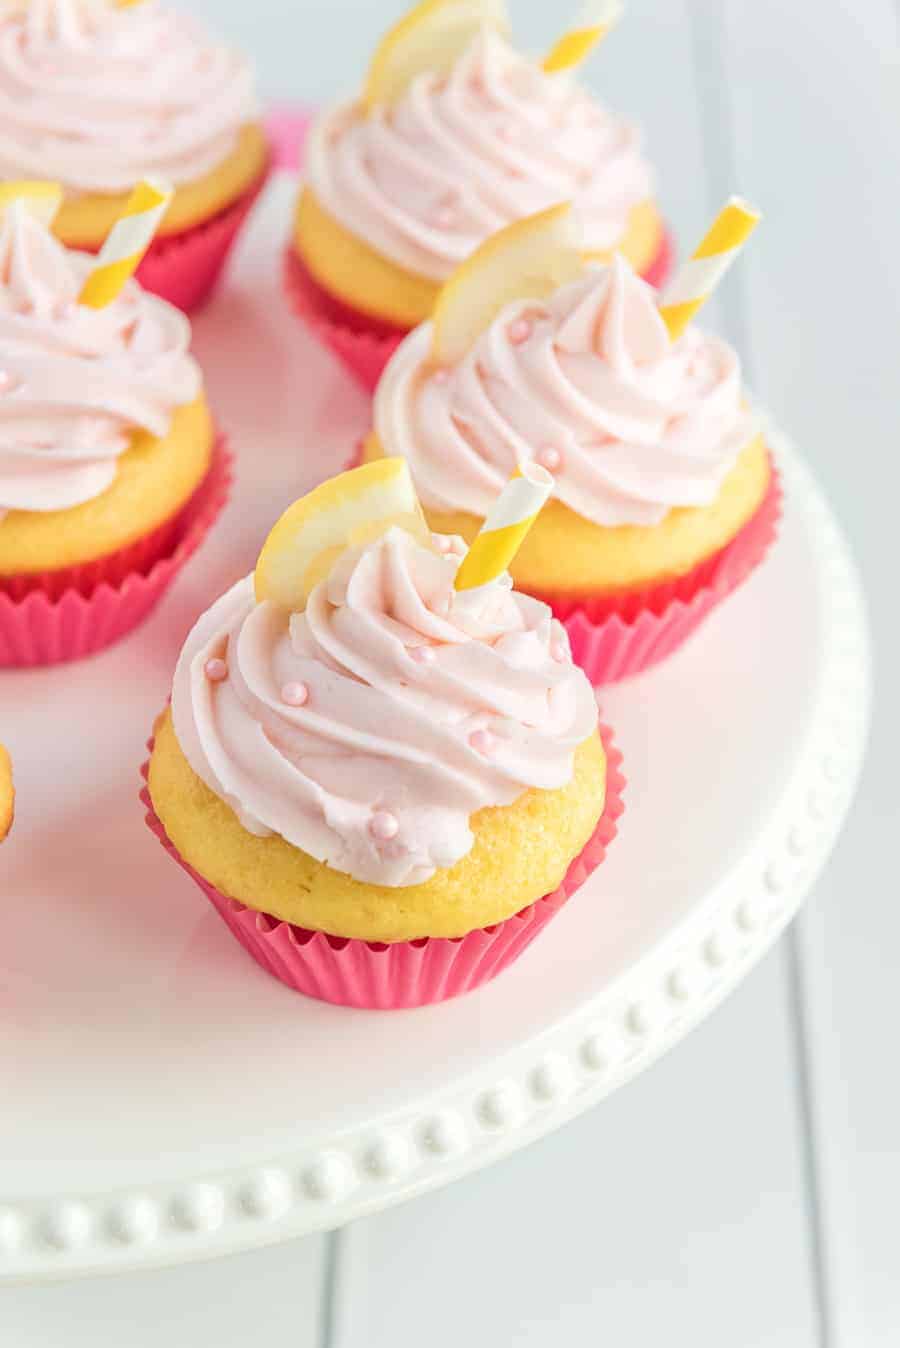 Not only are Pink Lemonade Cupcakes absolutely adorable--they're also the fluffiest tart and refreshing bite of lemony cake and frosting, perfect for any summer celebration.